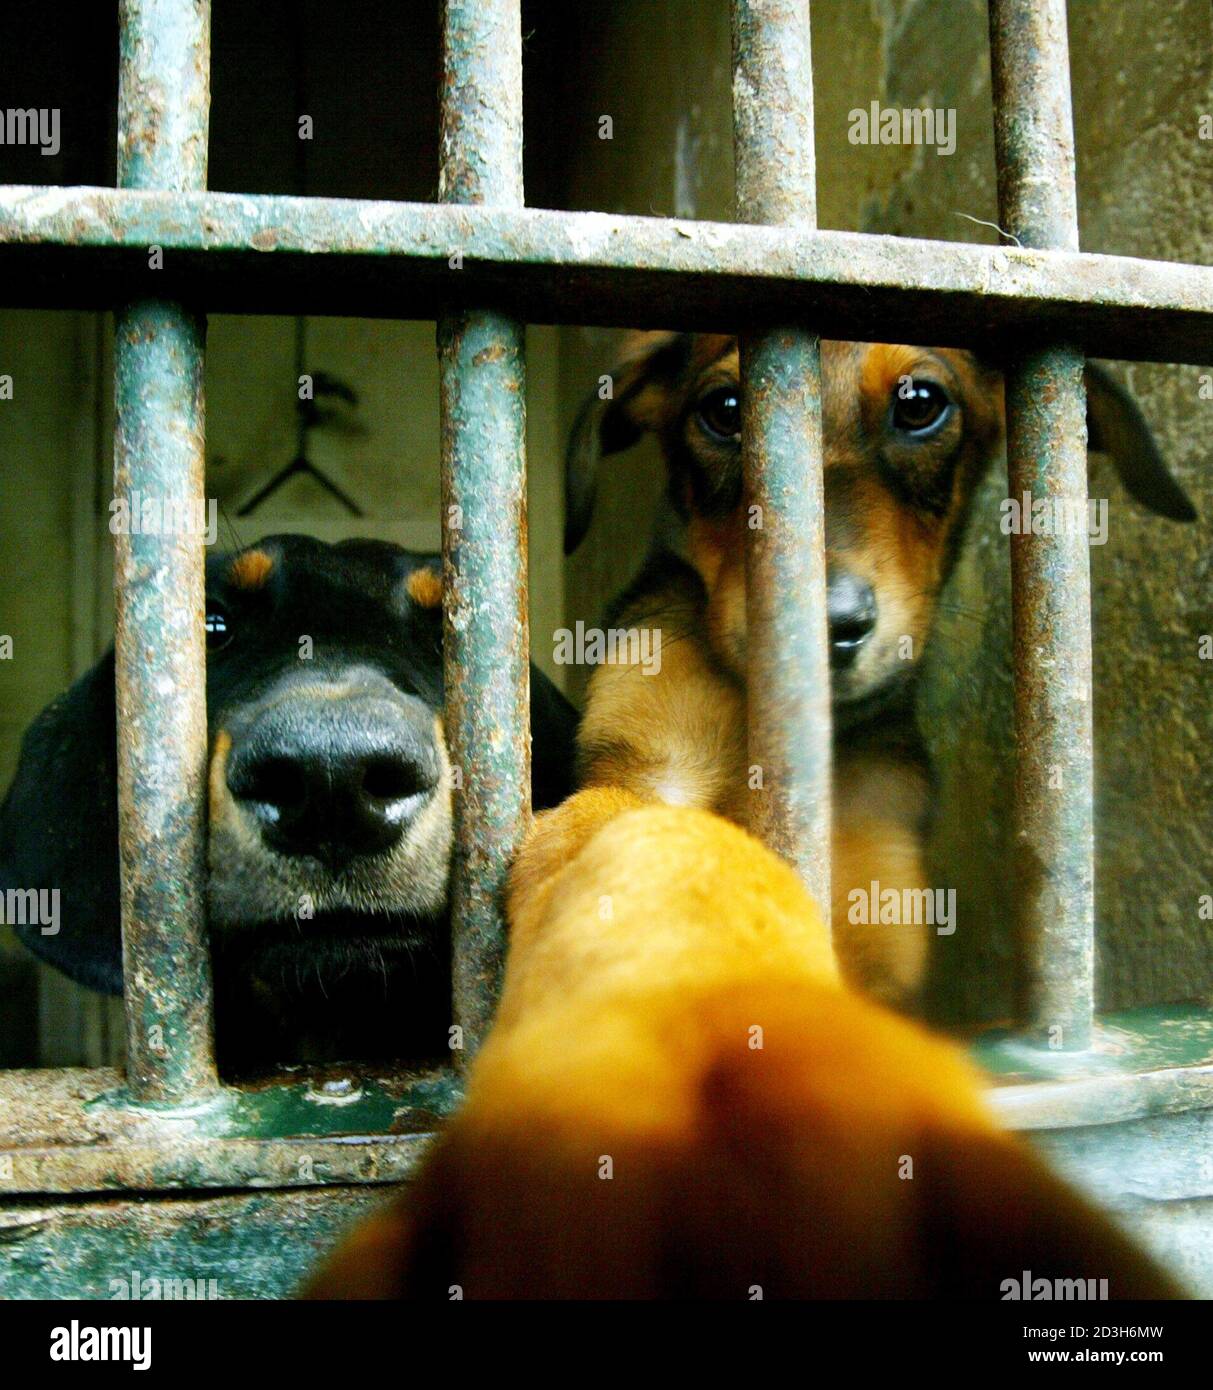 Stray dogs peer through the bars of a dilapidated cell inside Rome' s dogs  home as the dog tries to reach with his paw for the camera on July 31,  2002. As